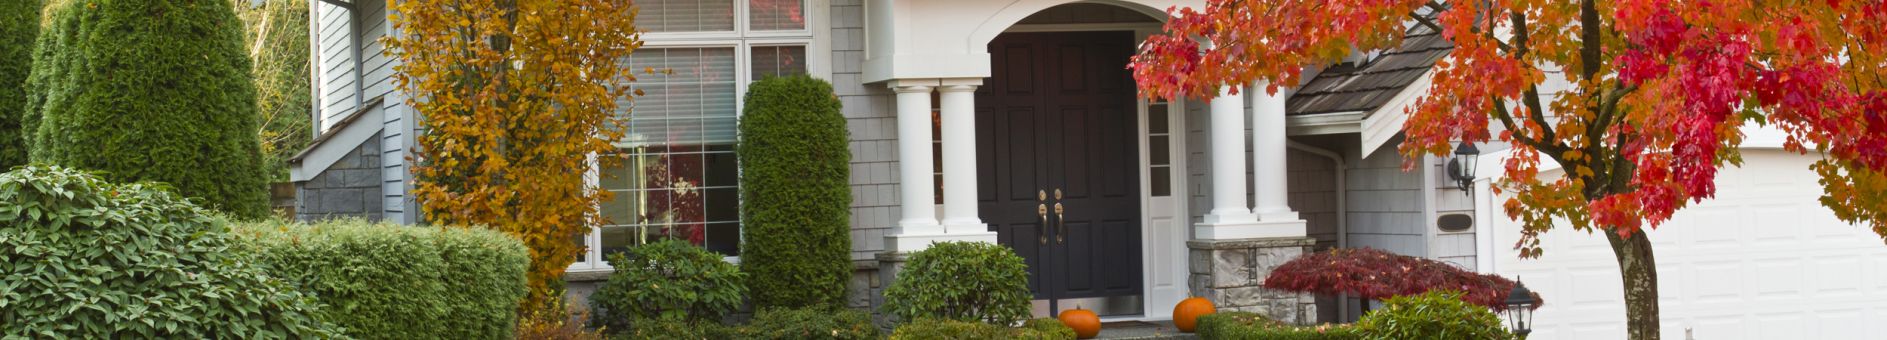 exterior of New England home shown in Fall